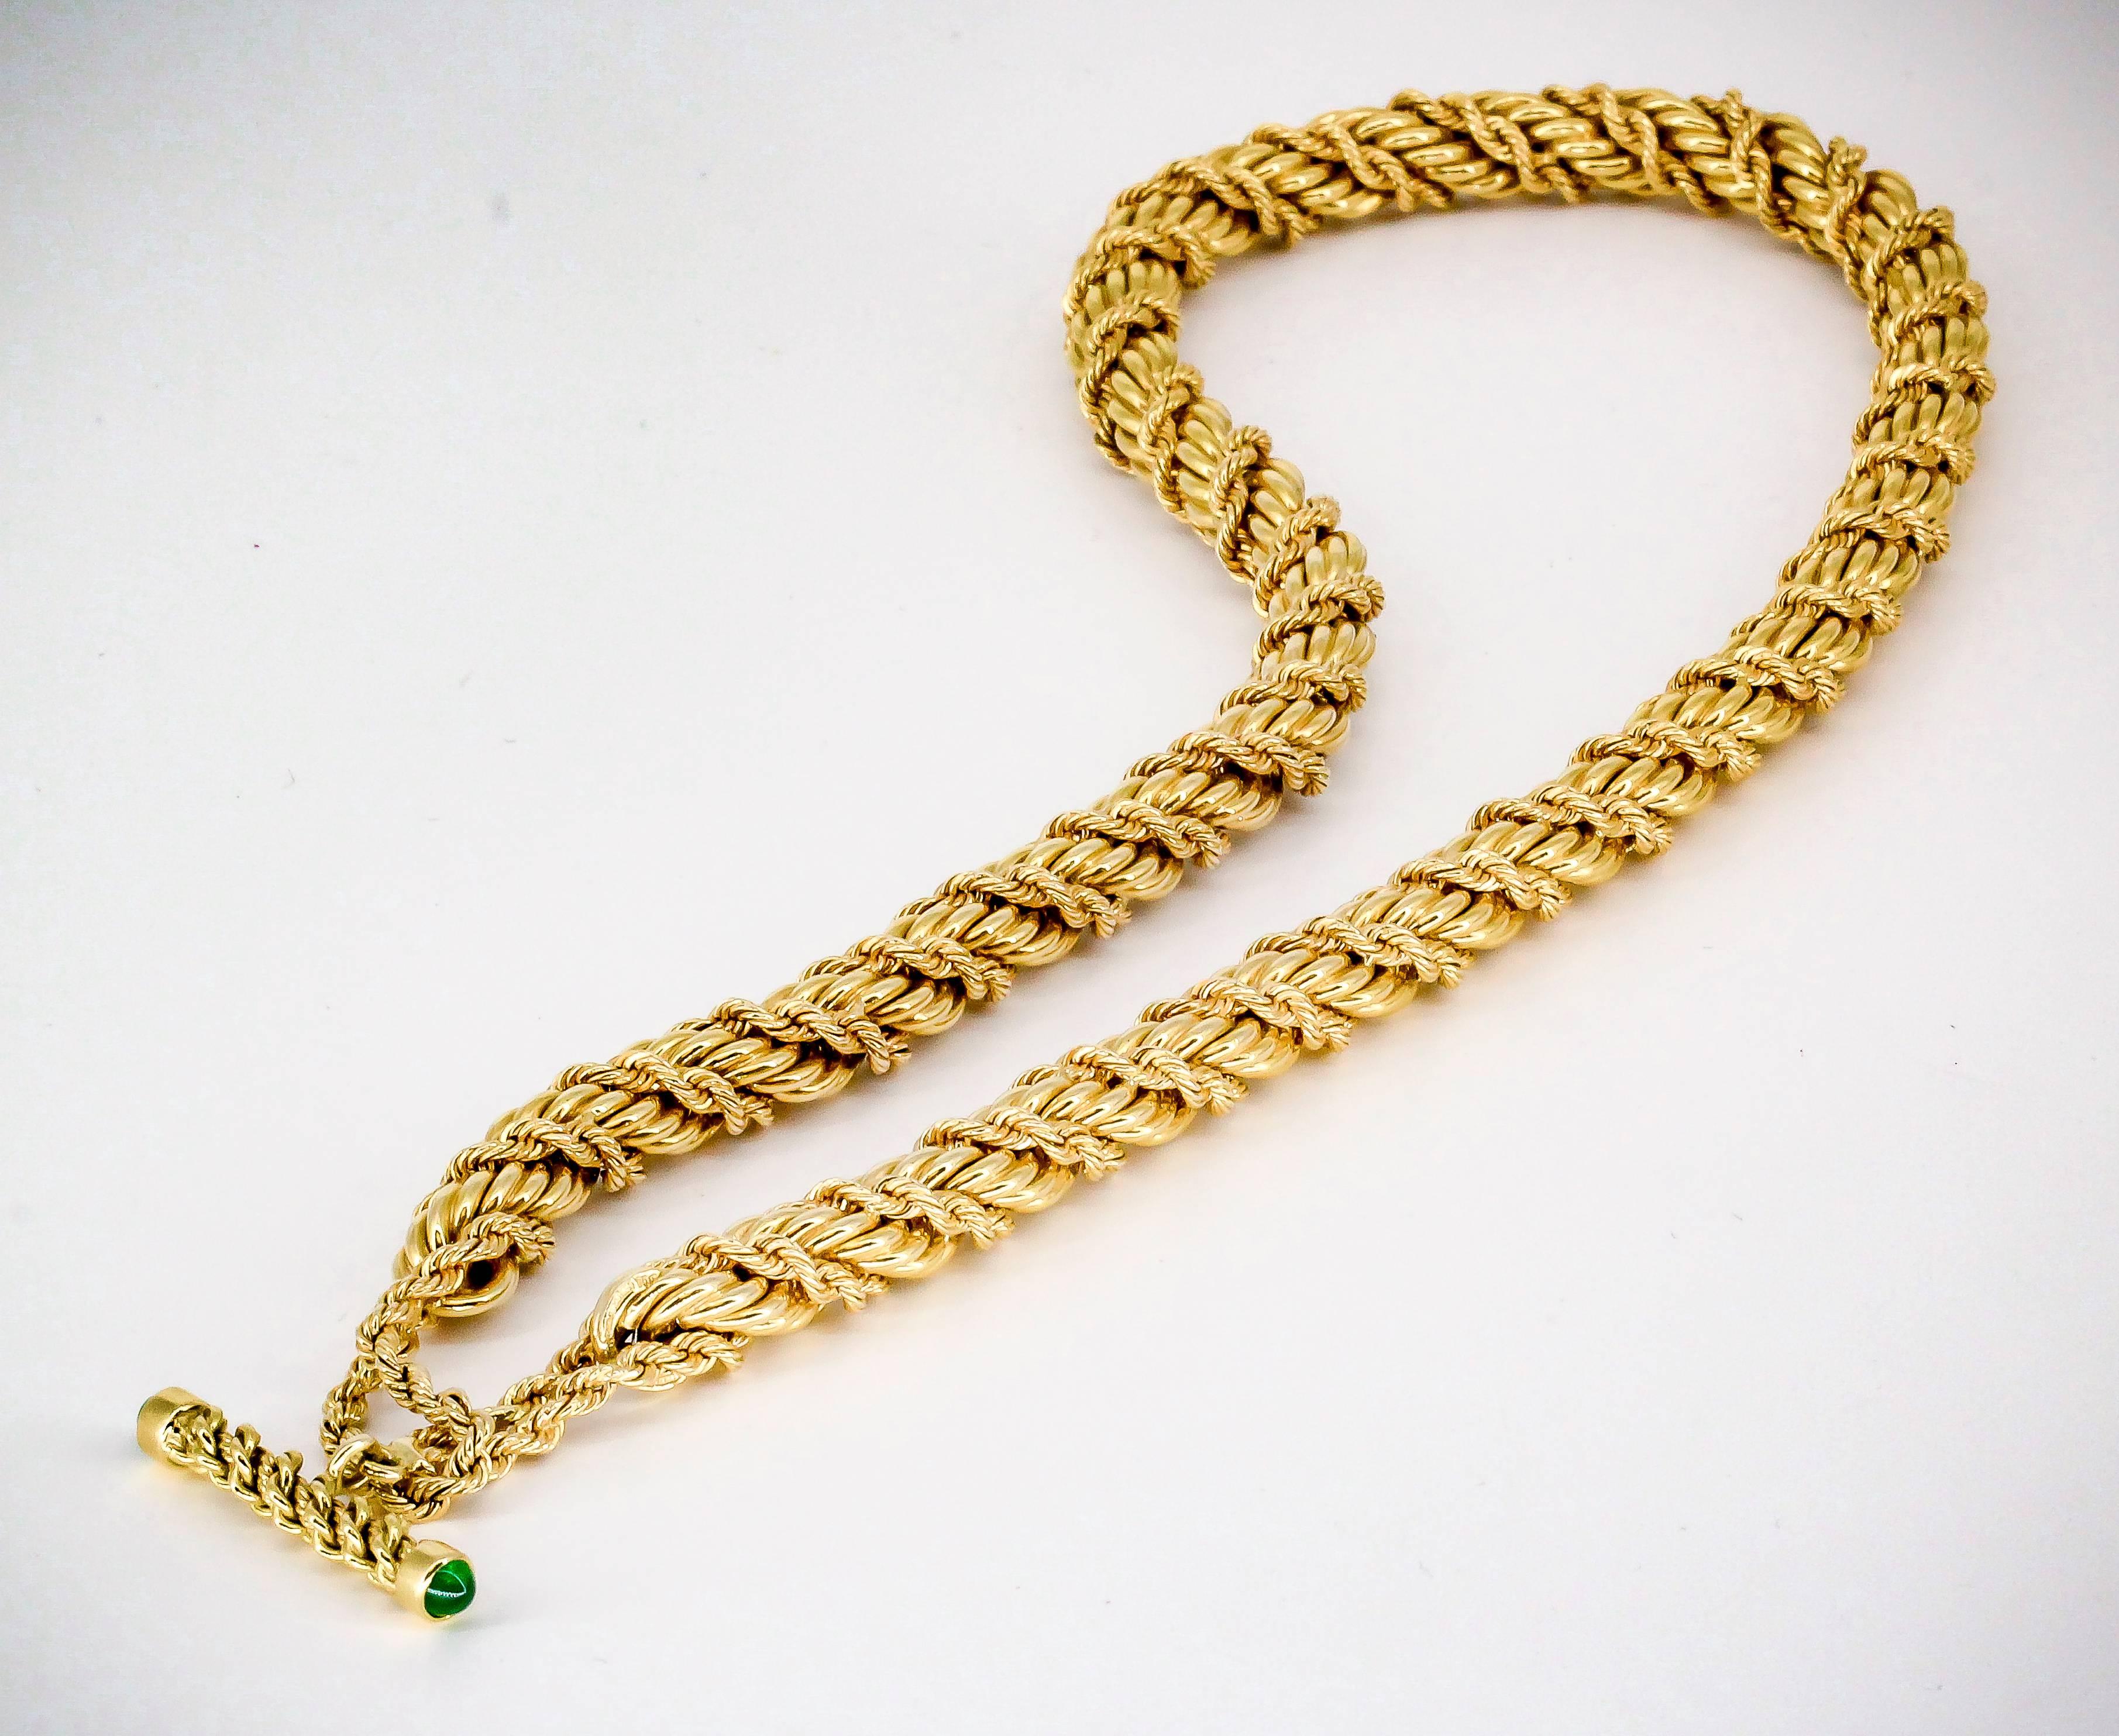 Rare and unusual emerald and 18K gold necklace by Tiffany & Co. Schlumberger, circa 1990s. Necklace feature a large twisted rope, with intertwined twisted rope design; as well as a toggle closure with the bar set with rich green cabochon